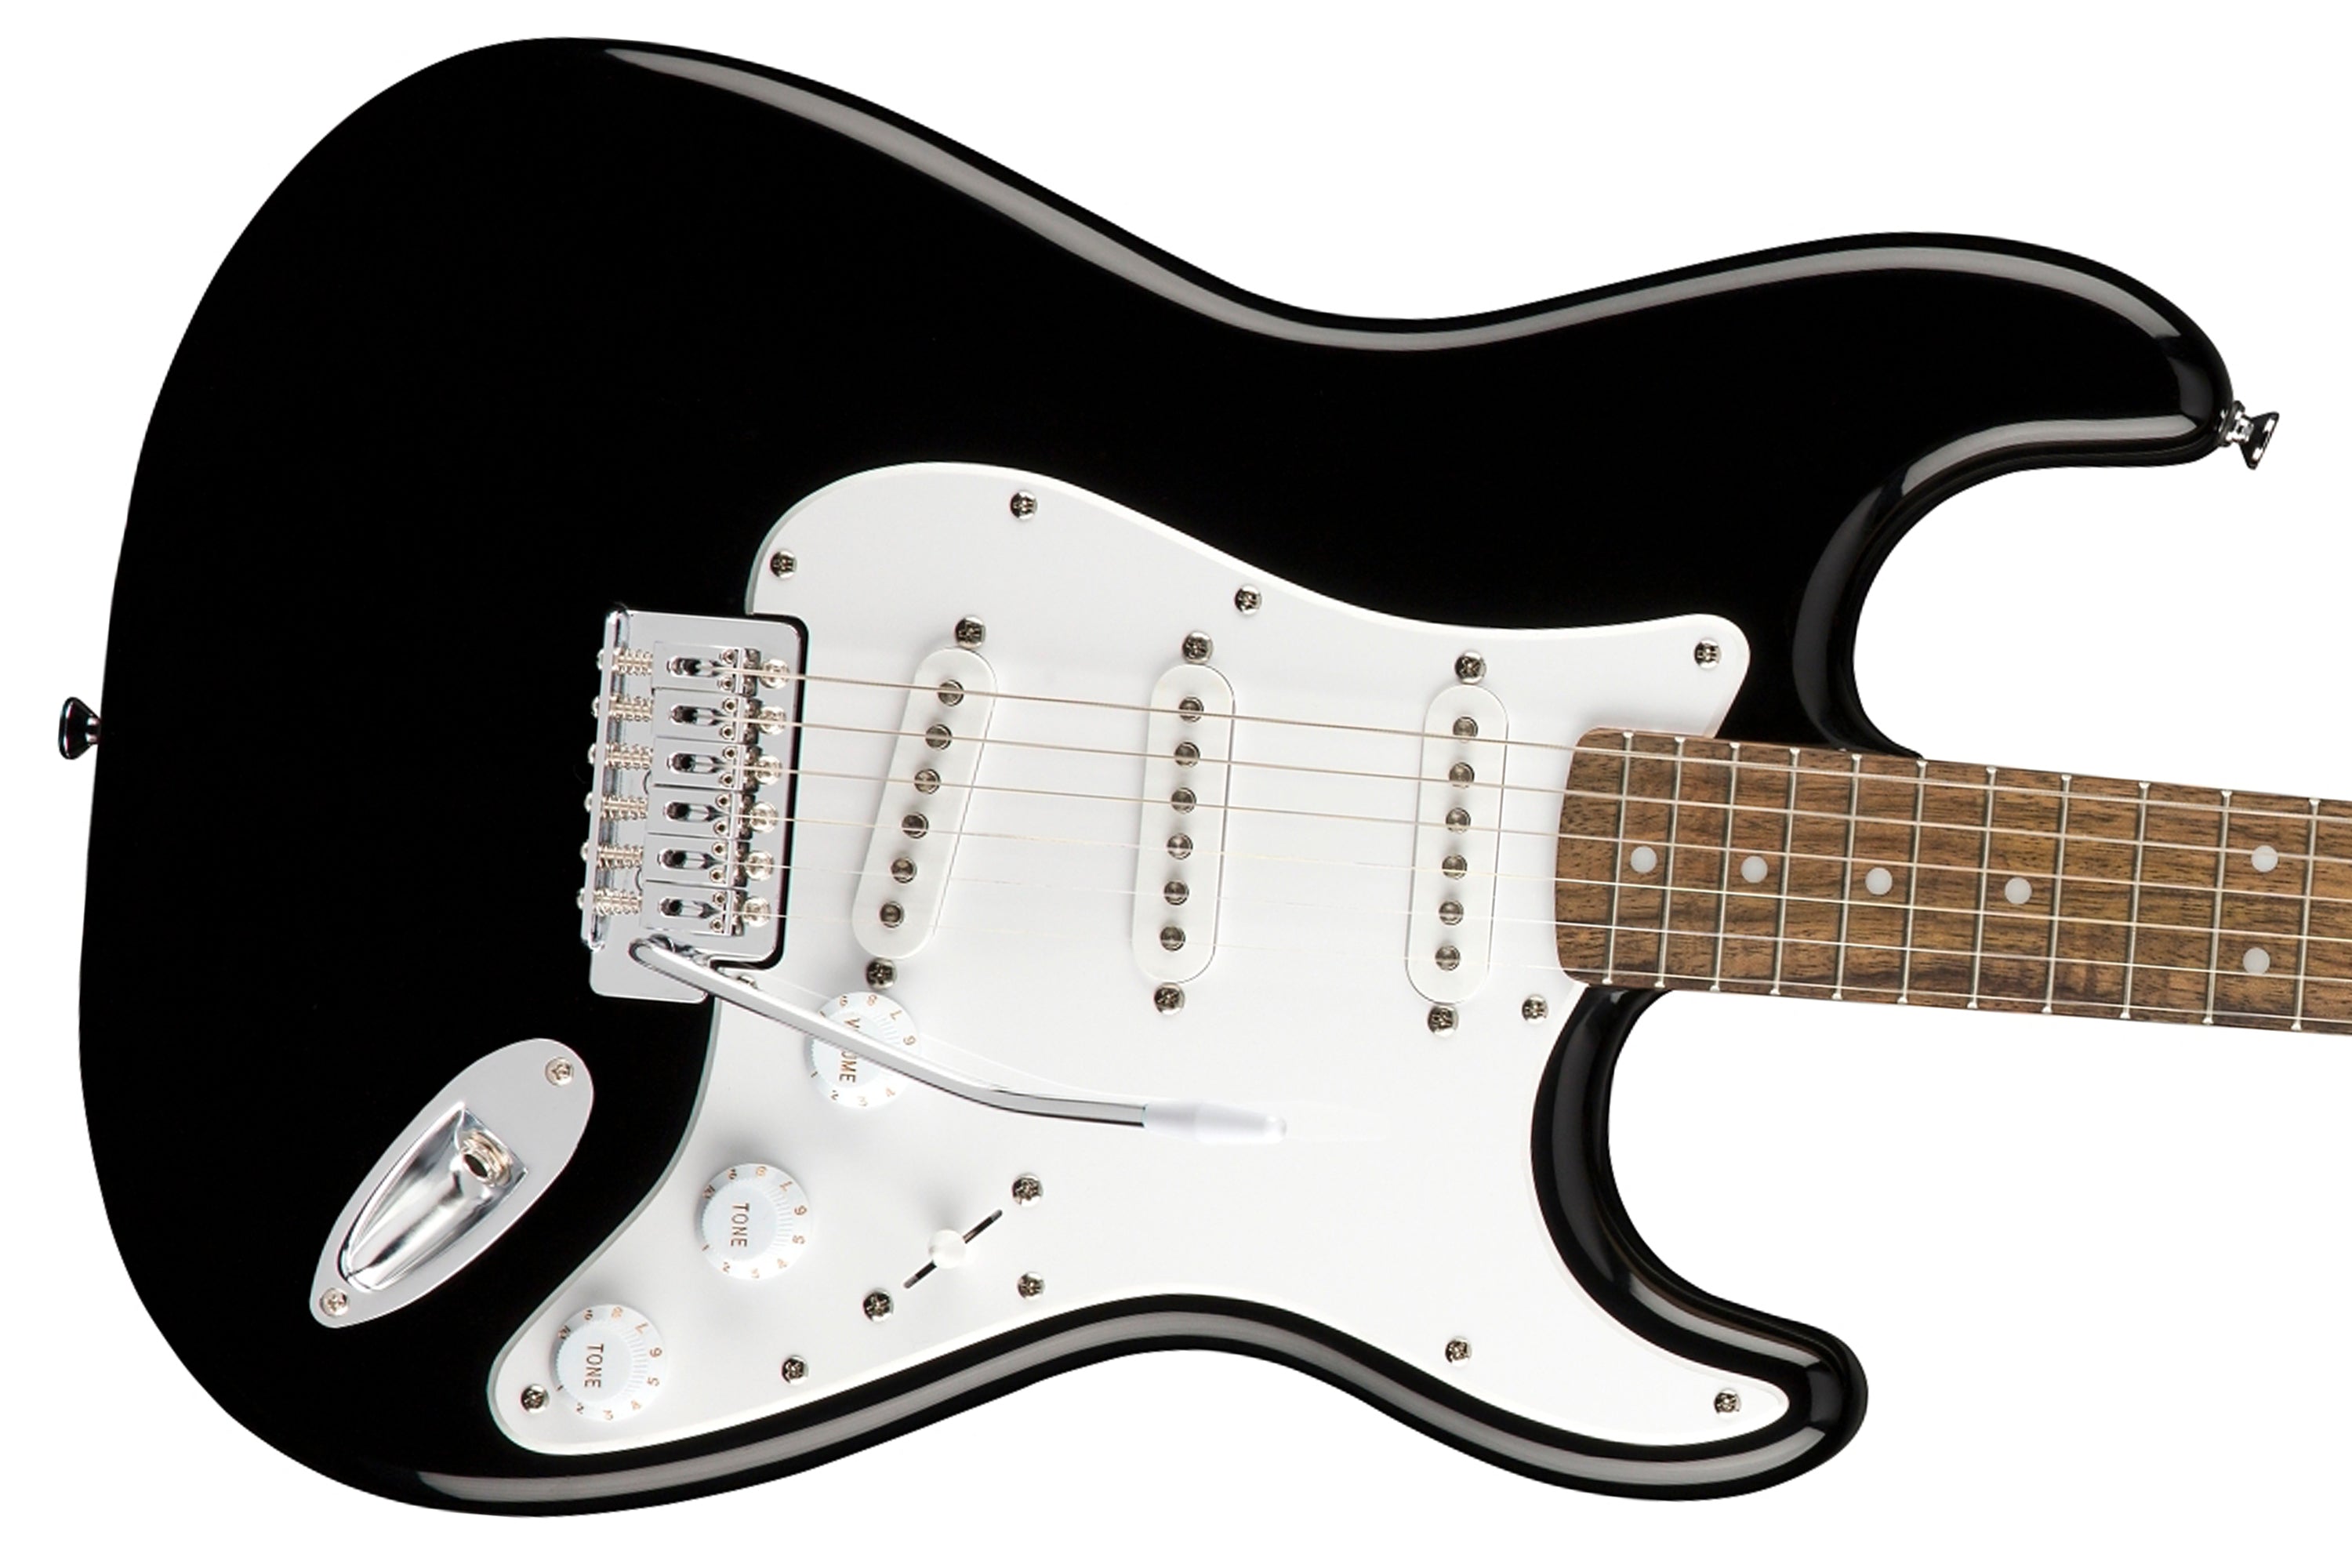 Squier By Fender Stratocaster Guitar Pack